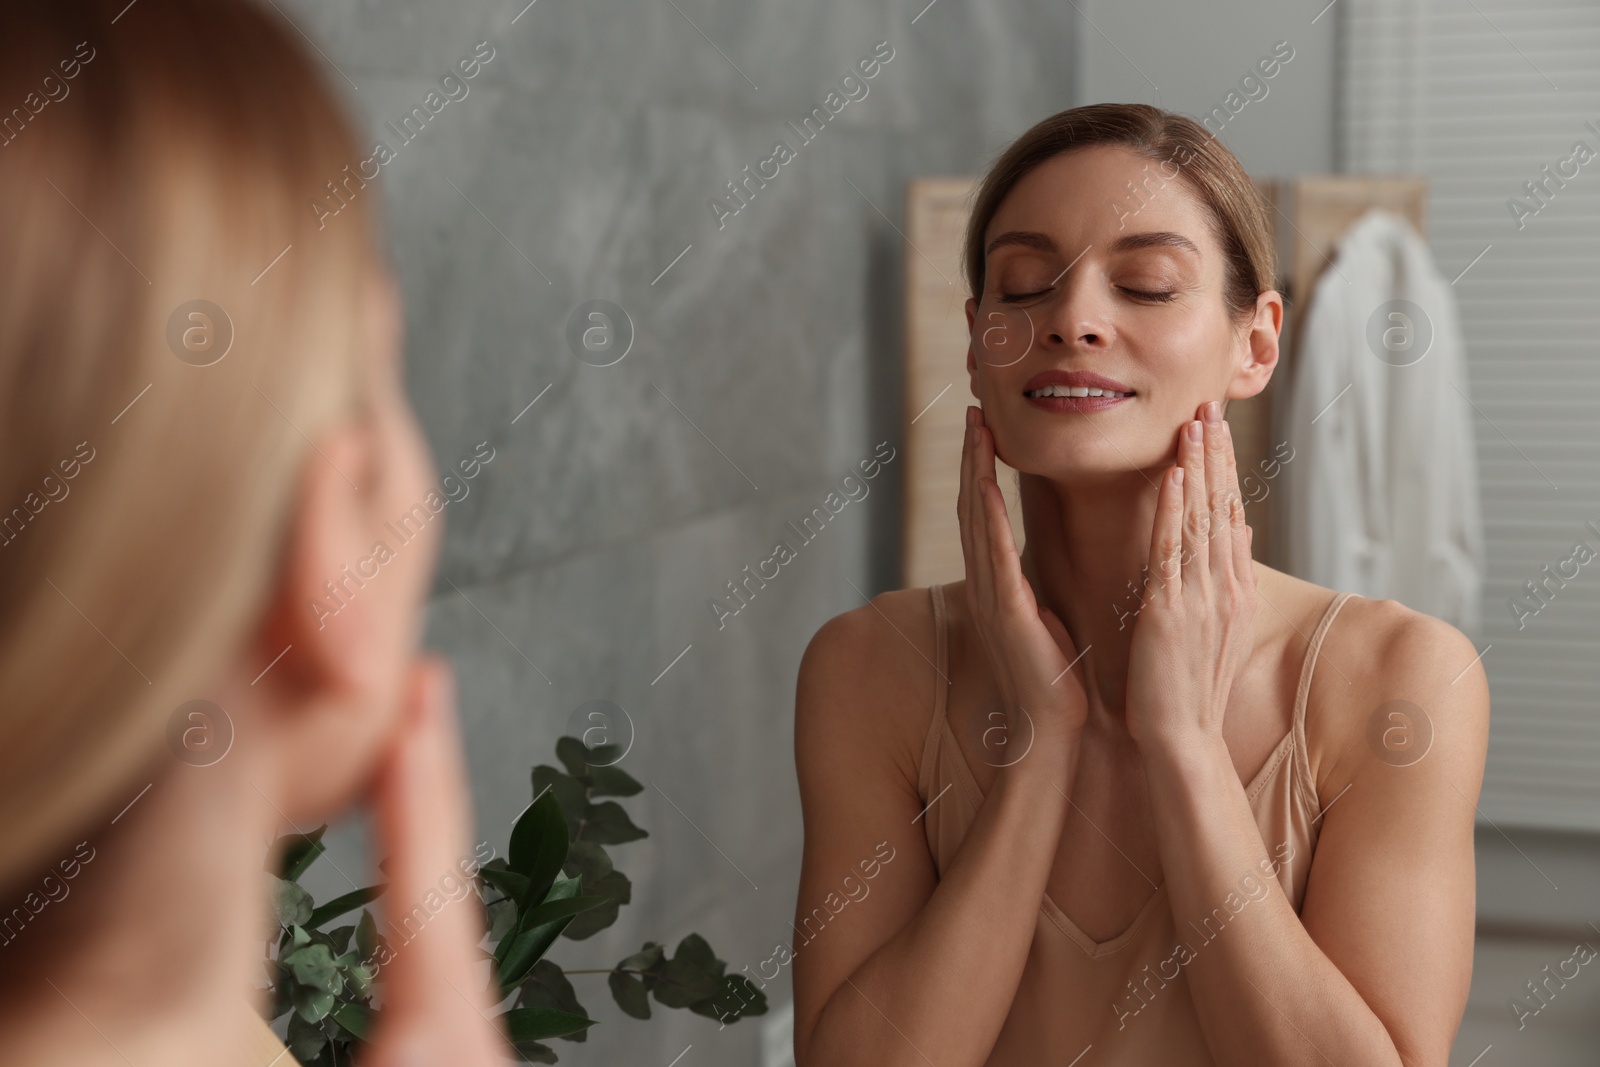 Photo of Woman massaging her face near mirror in bathroom